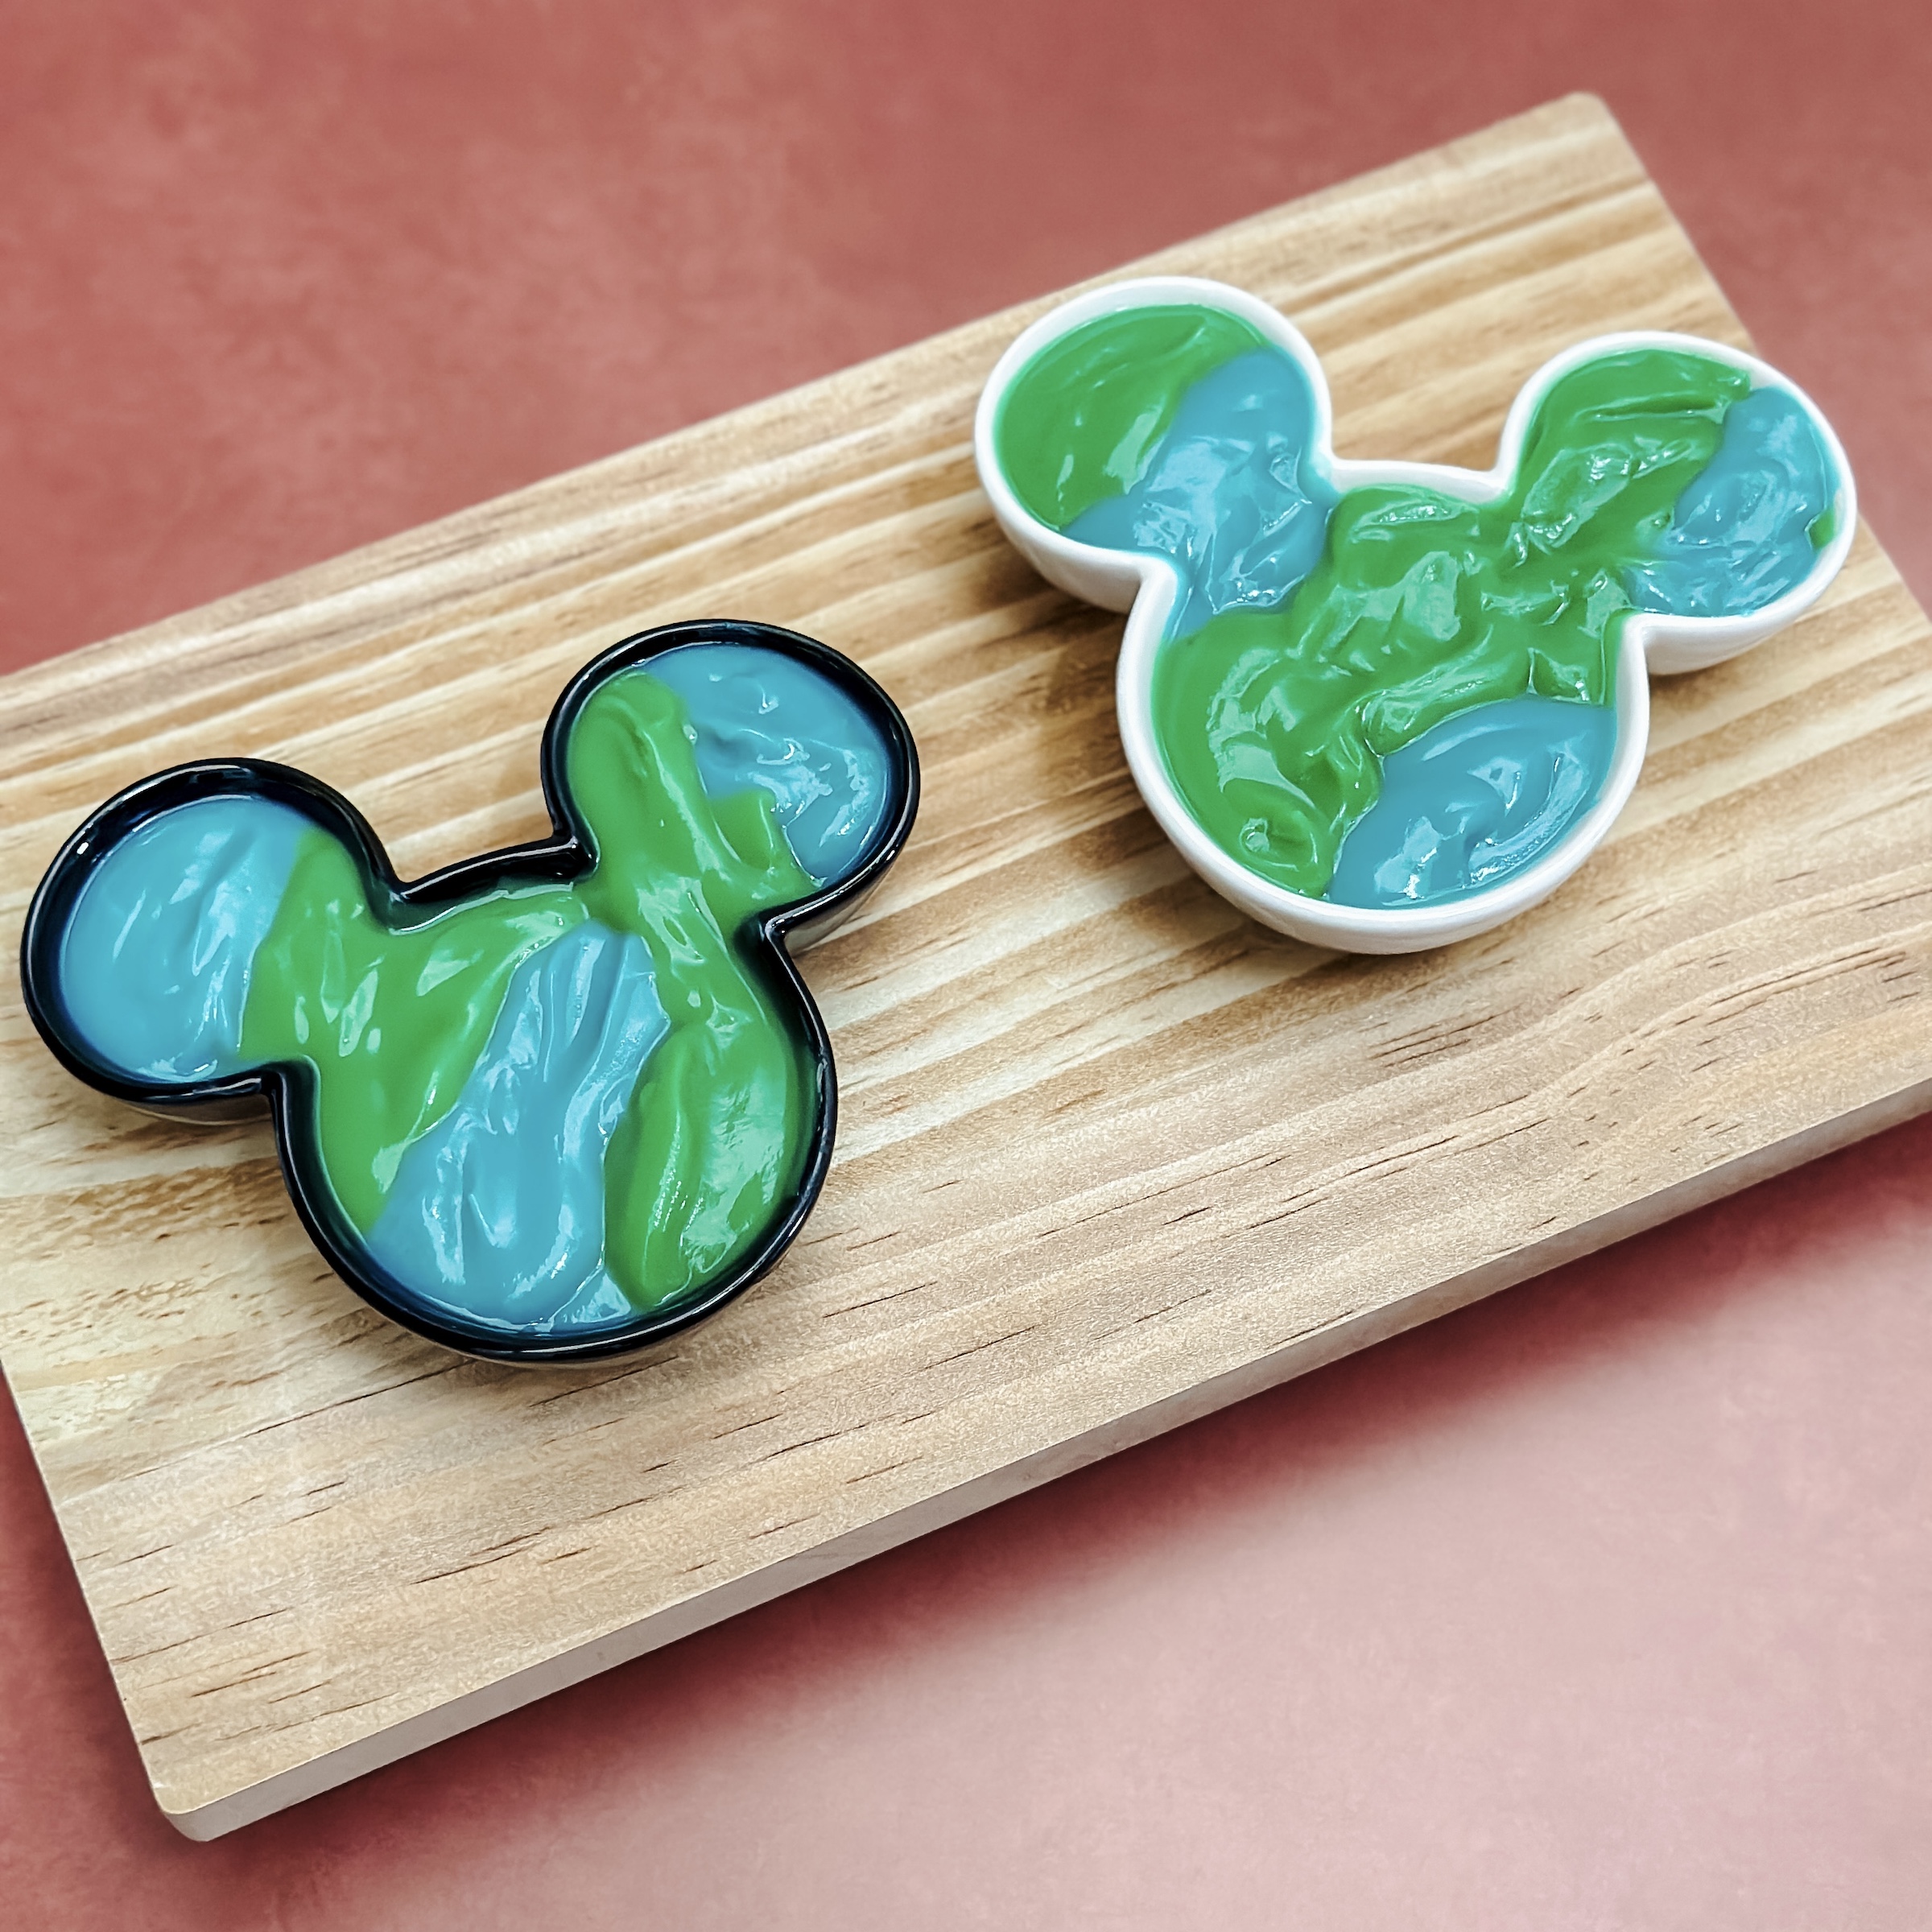 Mickey's Earth Day Pudding (green and blue vanilla pudding swirled into an earth pattern in a mickey shaped bowl)